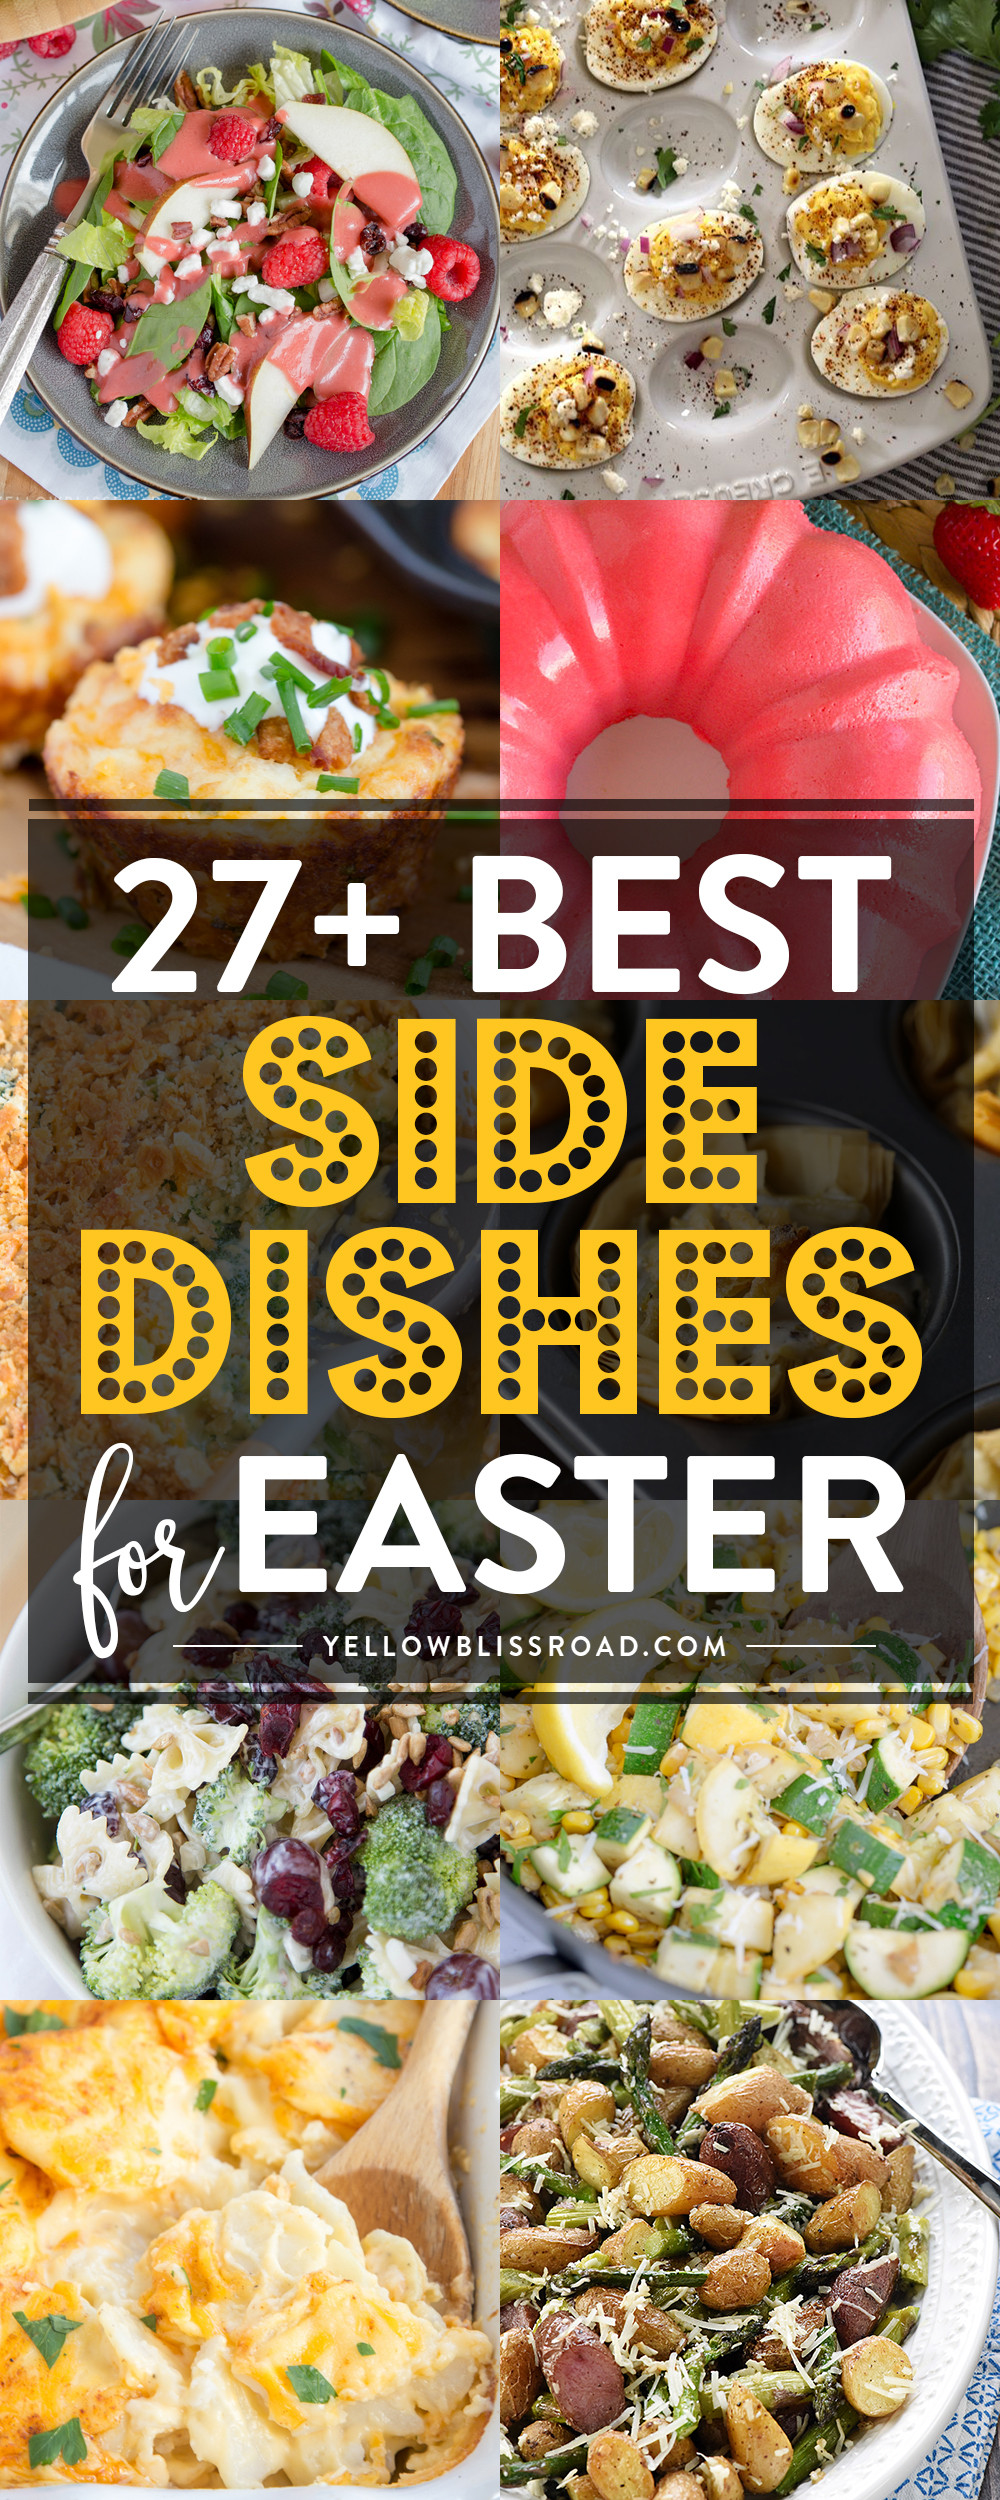 Easter Brunch Side Dishes
 Easter Side Dishes More than 50 of the Best Sides for